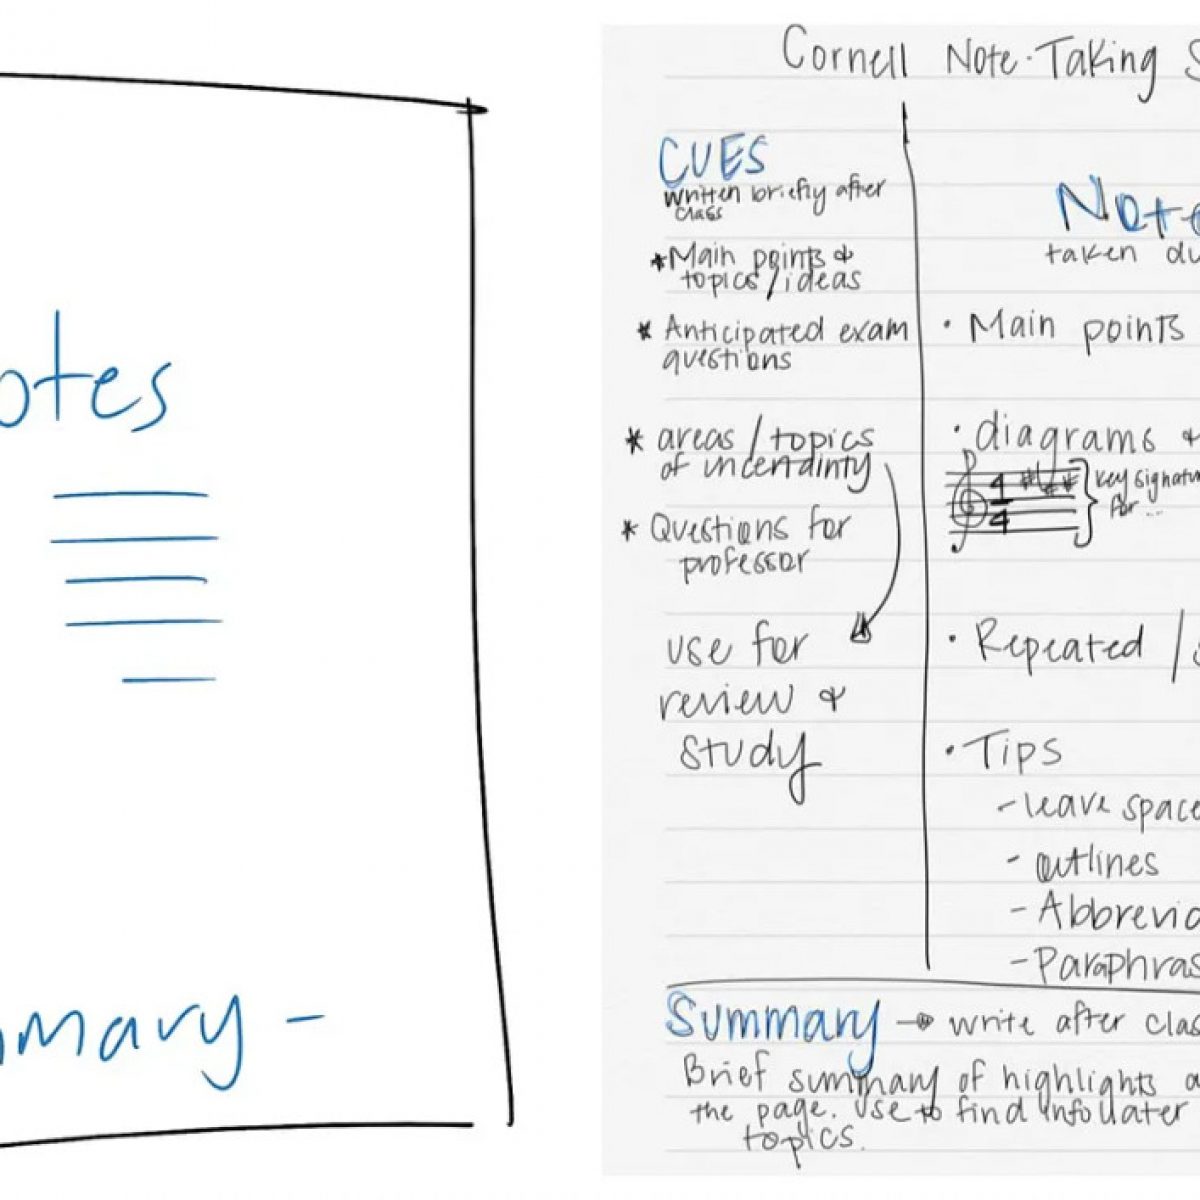 https://cellularnews.com/wp-content/uploads/2023/09/what-is-cornell-note-taking-system-and-how-to-use-it-1693963008-1200x1200.jpg